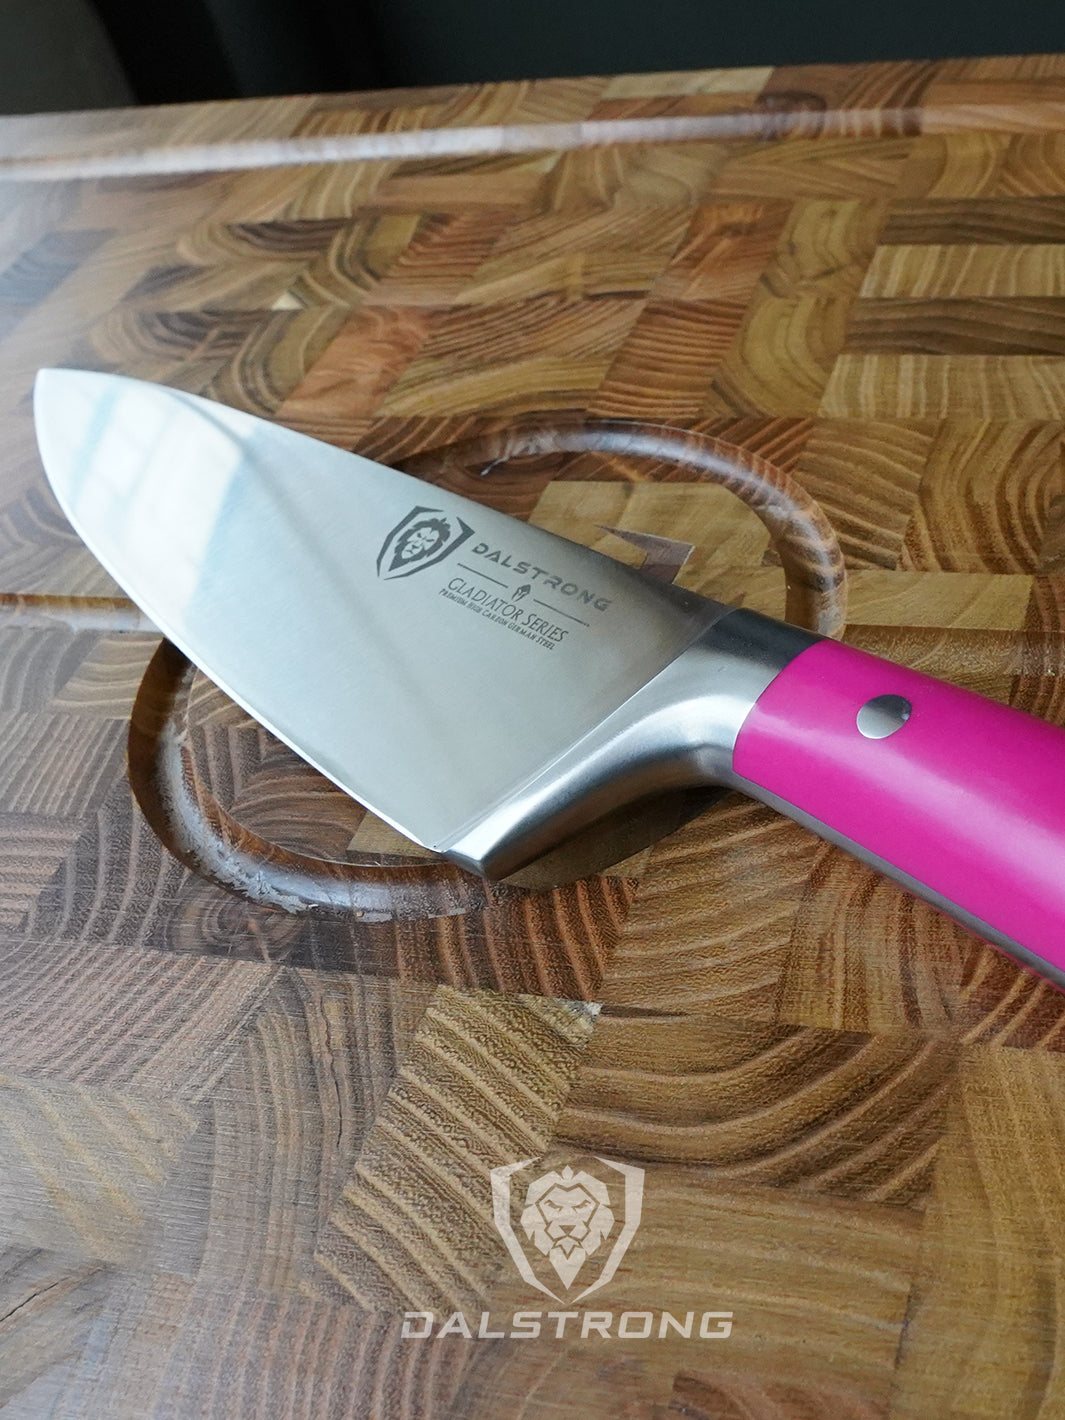 Dalstrong gladiator series 8 inch chef knife with fushia handle in top of a dalstrong wooden cutting board.